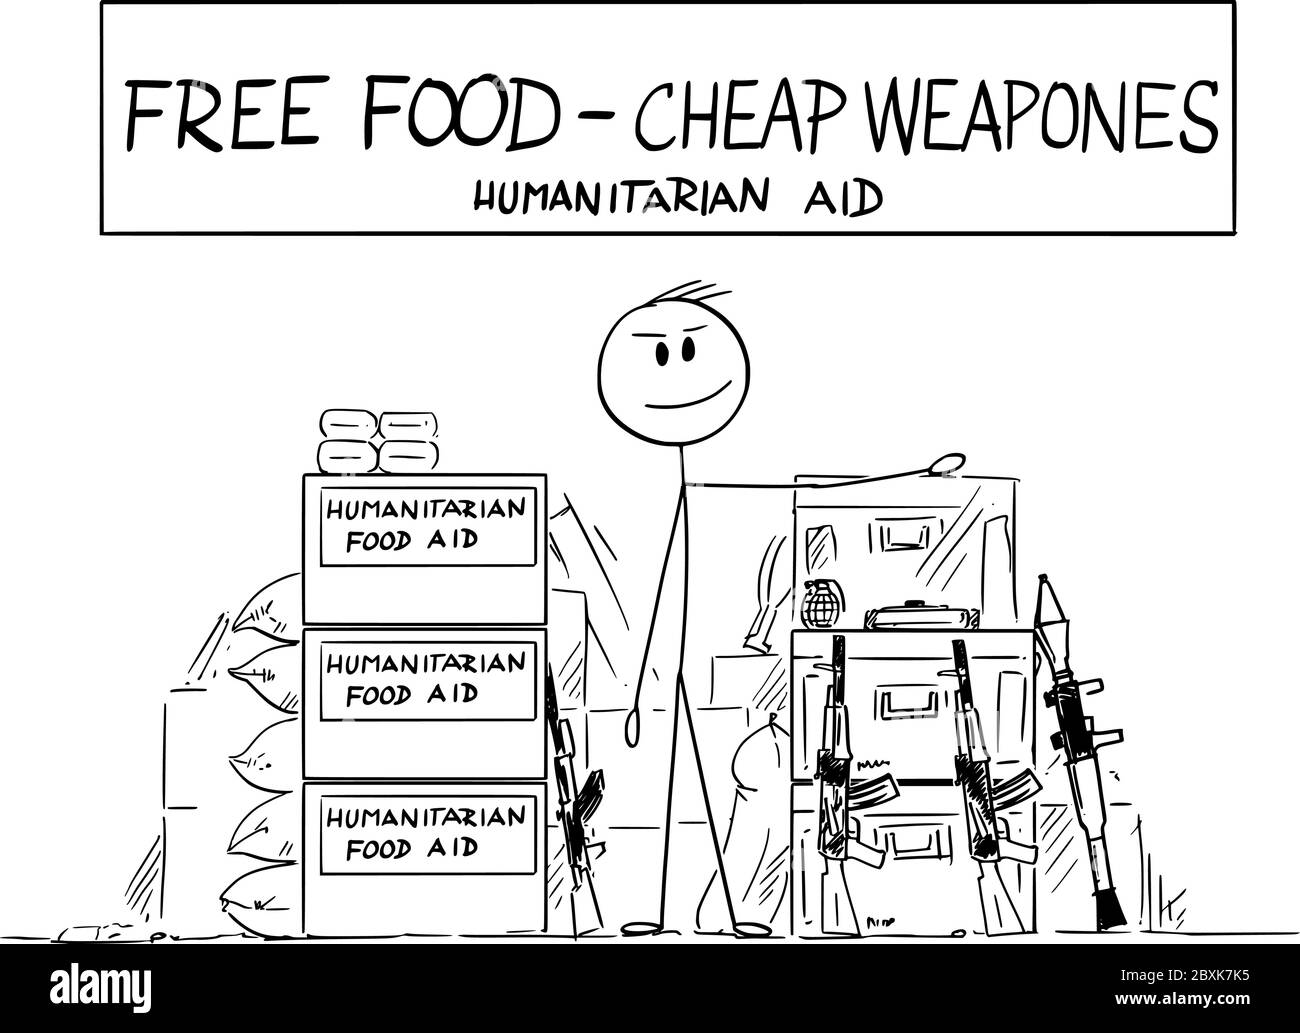 Vector cartoon stick figure drawing conceptual illustration of local farmer selling humanitarian aid food, and weapons on local market in developing country in Africa or Asia. Stock Vector